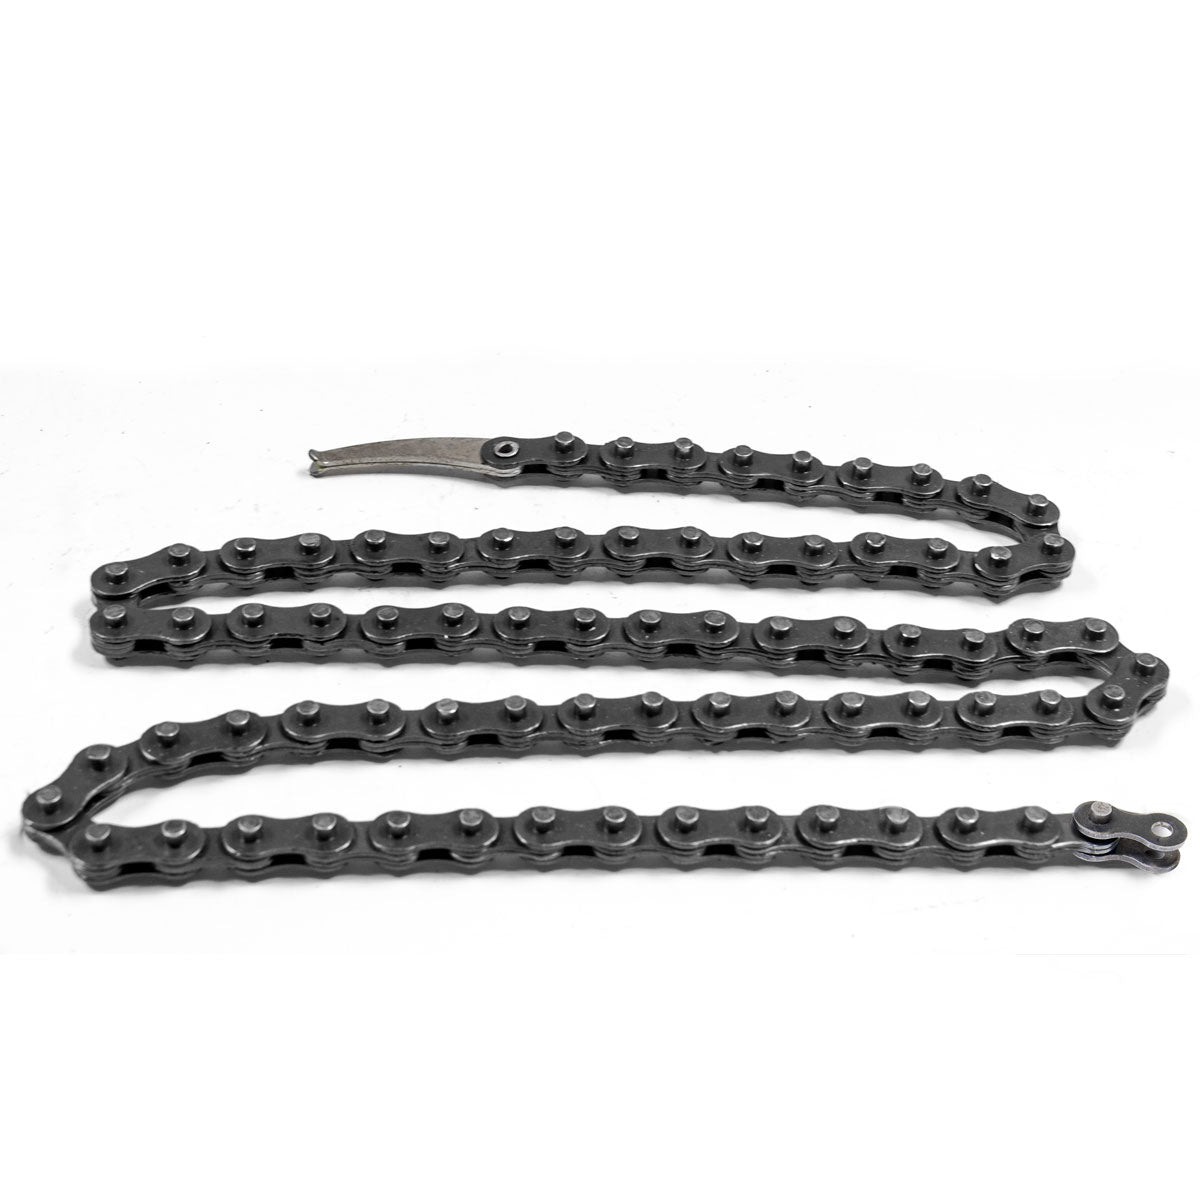 Replaceable Chains for Chain Pliers